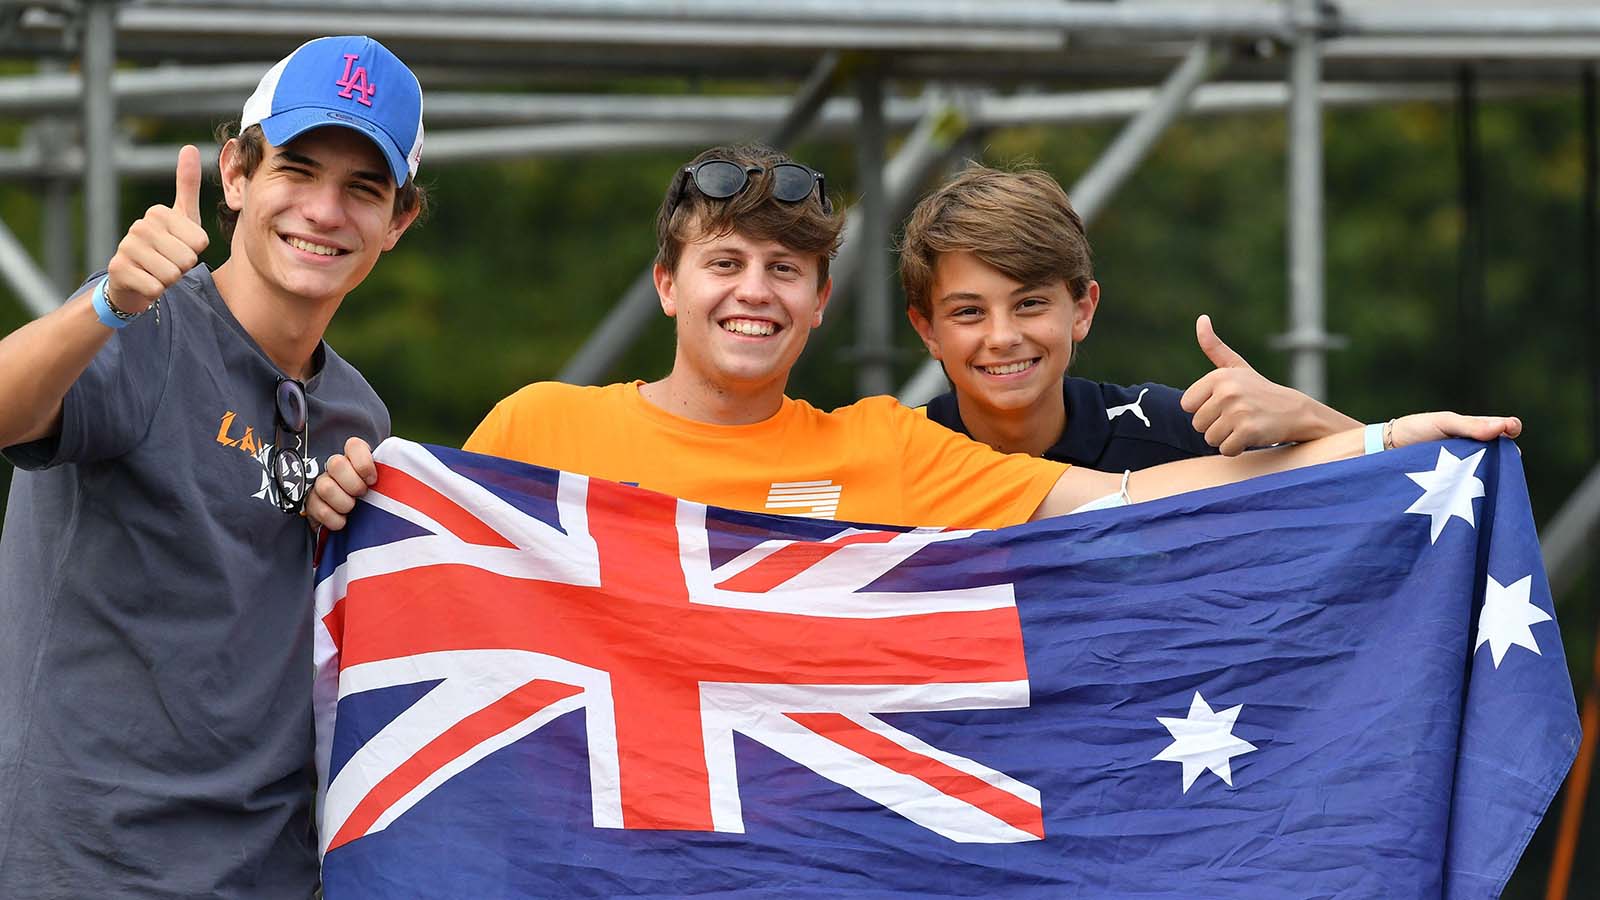 Fans pose with the Australia flag before practice at Monza. September 2021